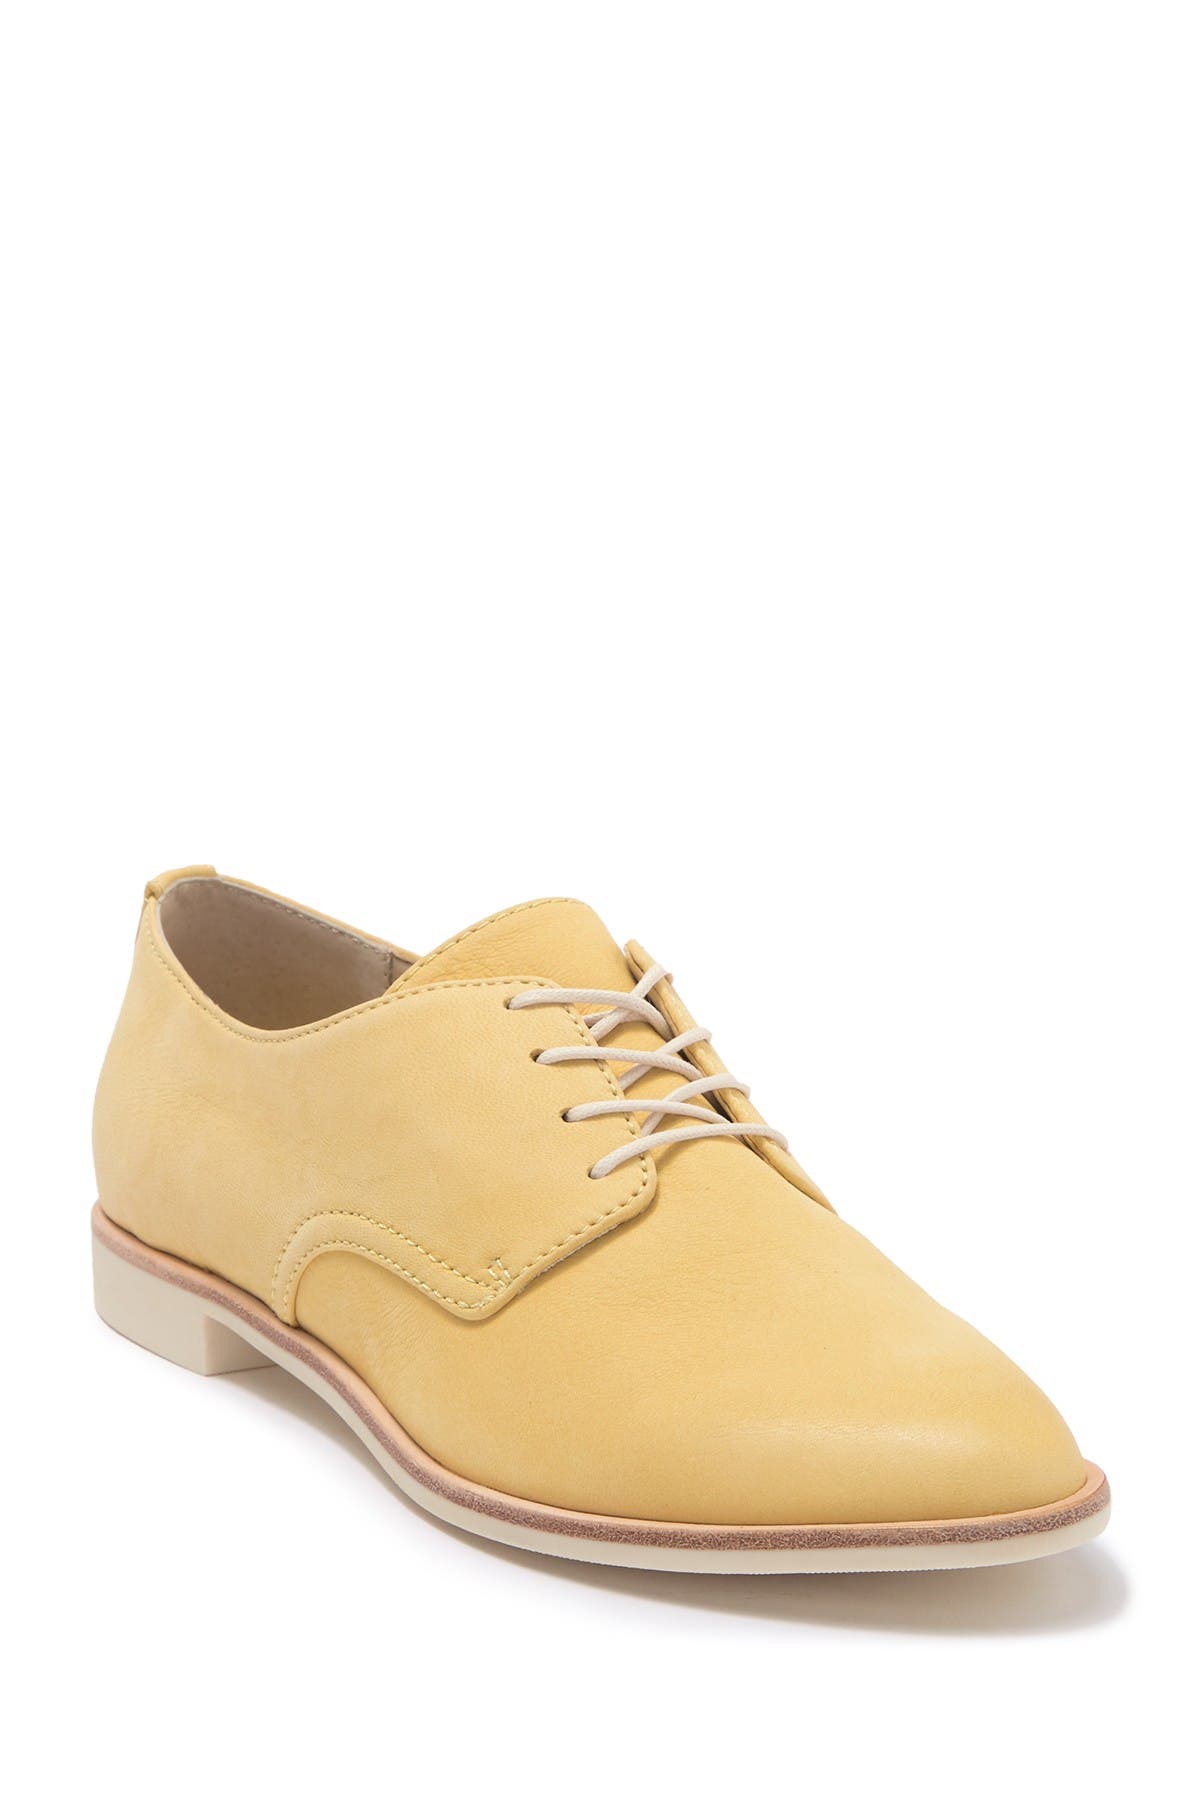 dolce vita kyle oxford loafers